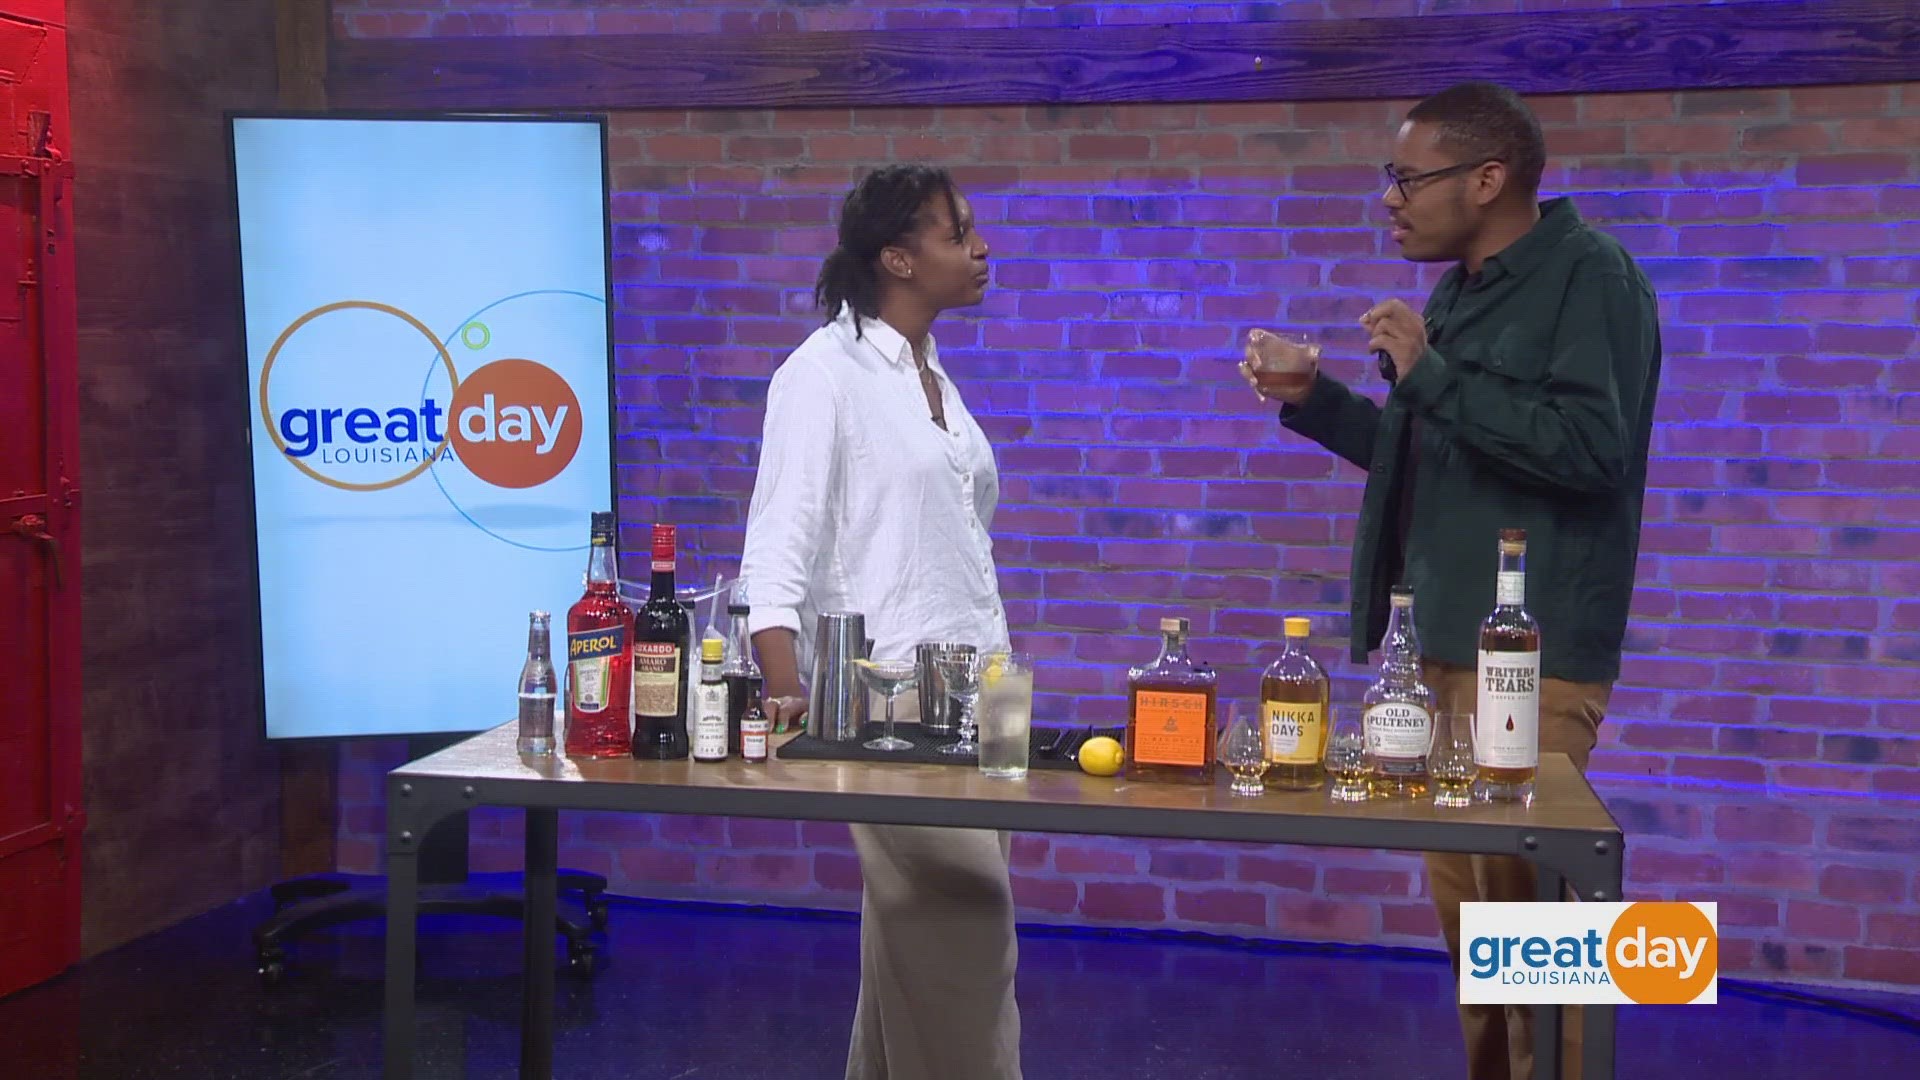 Local mixologist Erika Flowers shared a few cocktail recipes in honor of World Whisky Day on May 20.